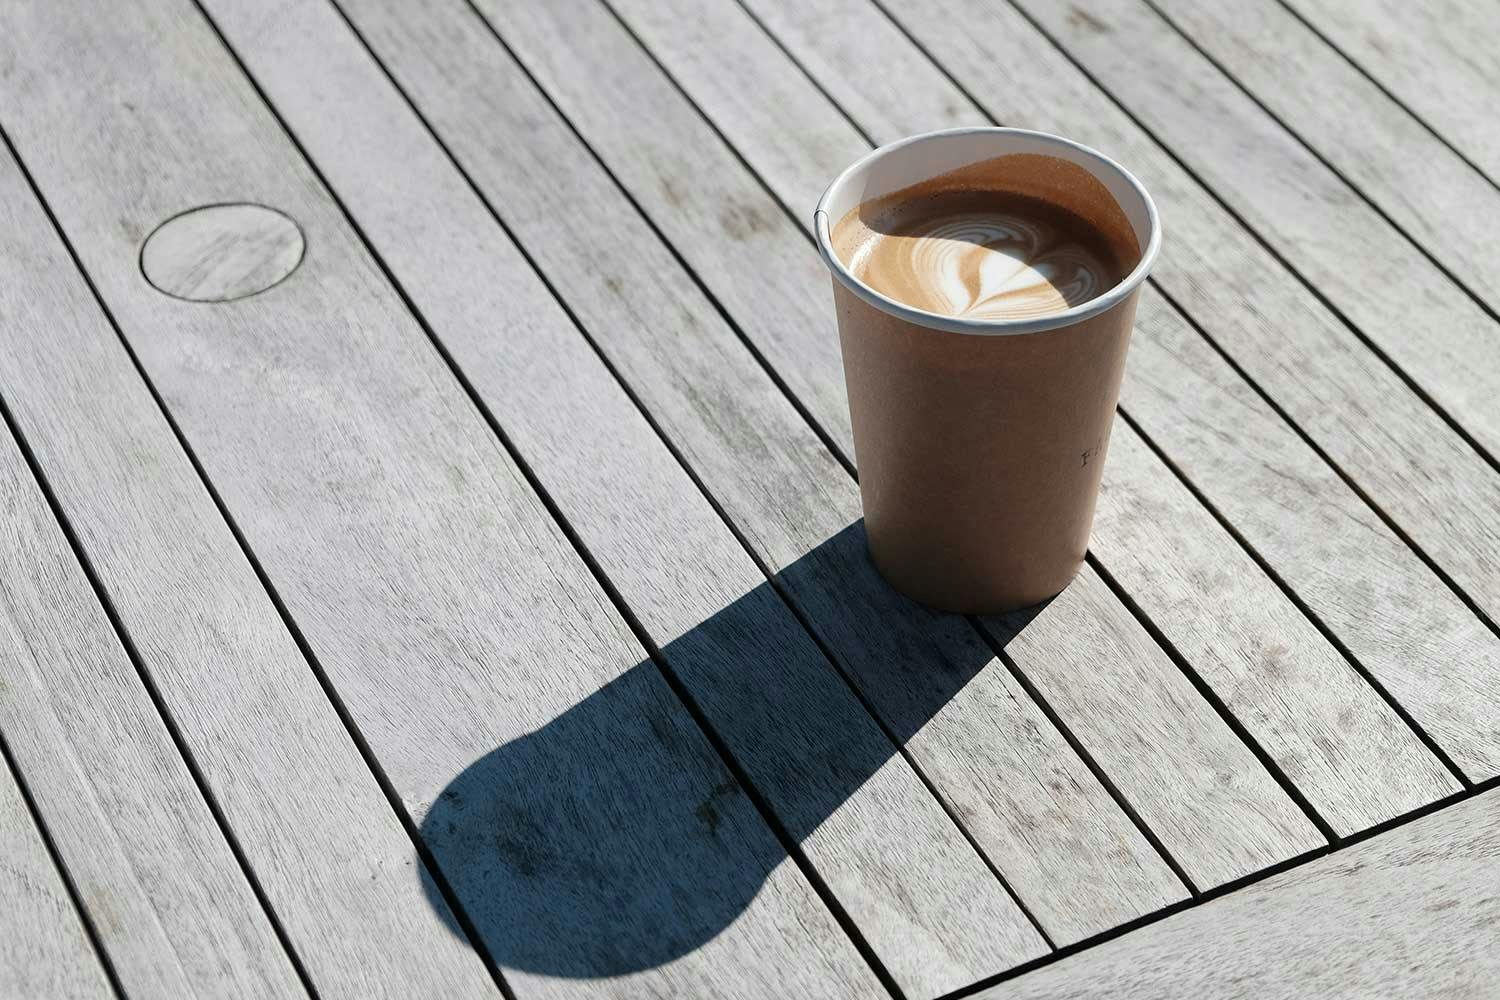 A latte in a disposable coffee cup sitting on a wooden patio table. Sunlight casts a shadow of the cup.